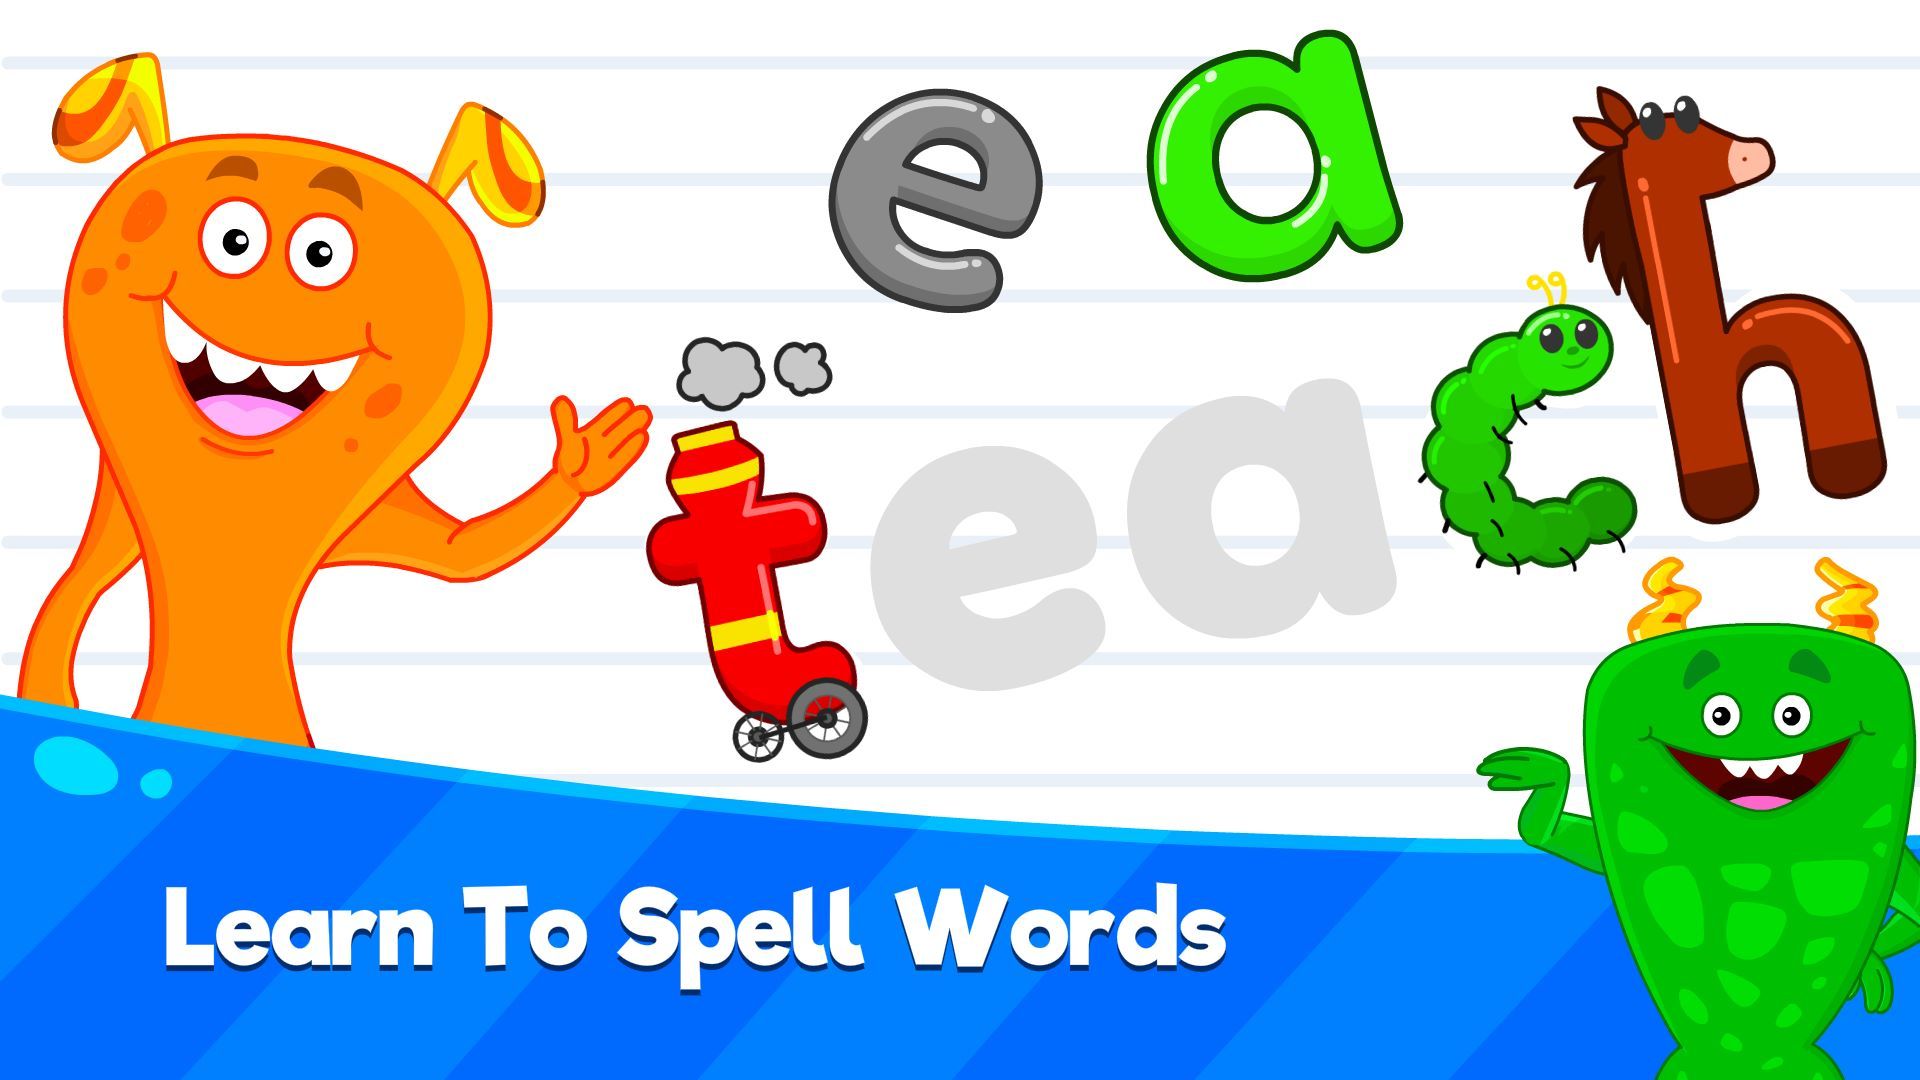 Kids Spelling Games and ABC Learning - Learn to Spell & Read Words